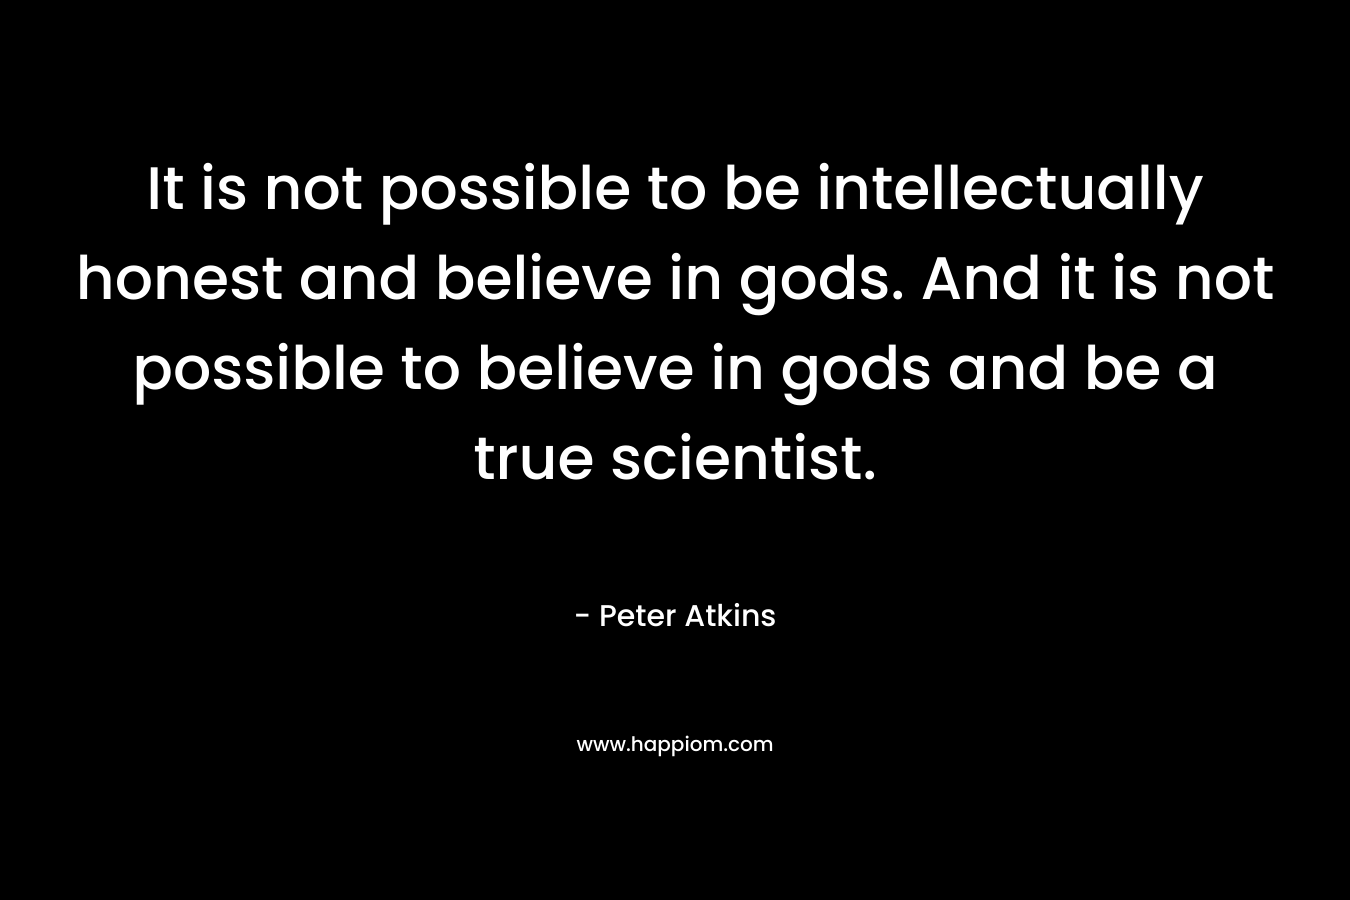 It is not possible to be intellectually honest and believe in gods. And it is not possible to believe in gods and be a true scientist.